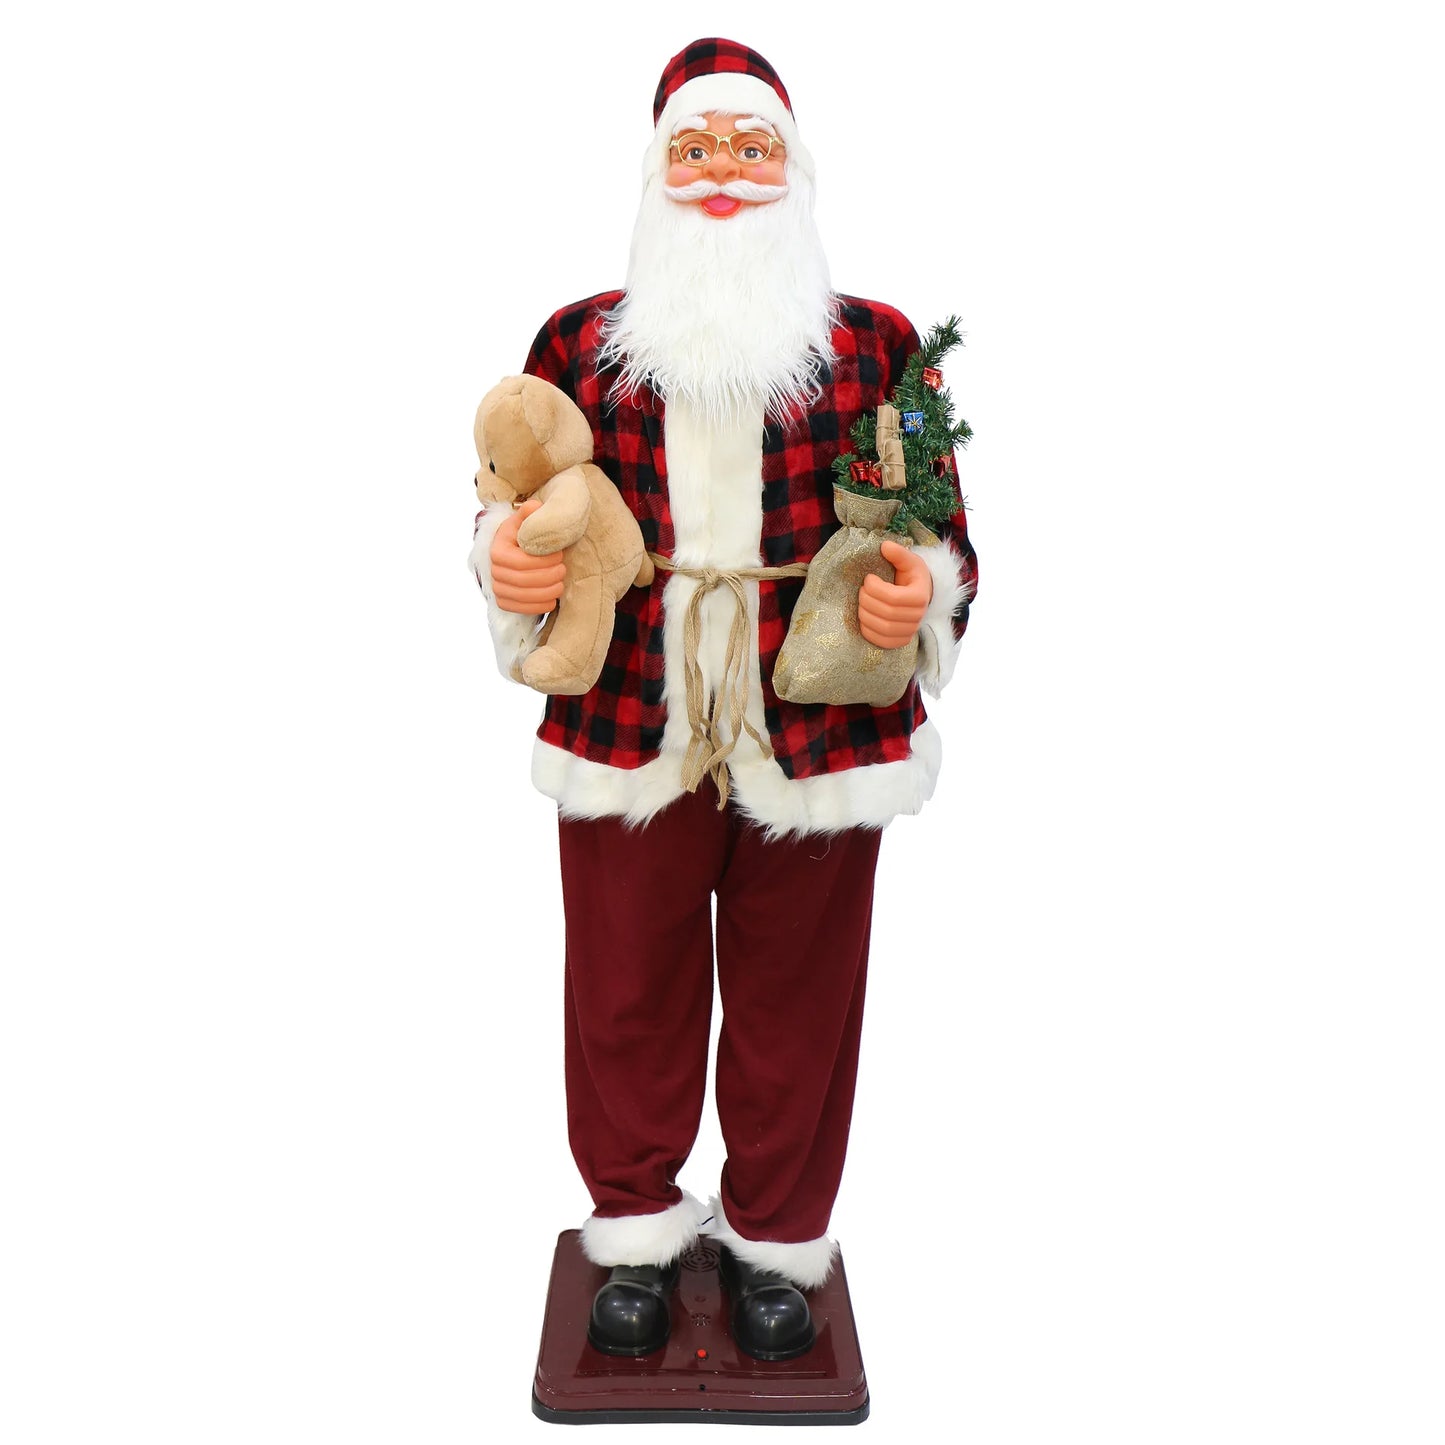 Santa Claus Christmas Decor with Lights and Voice control